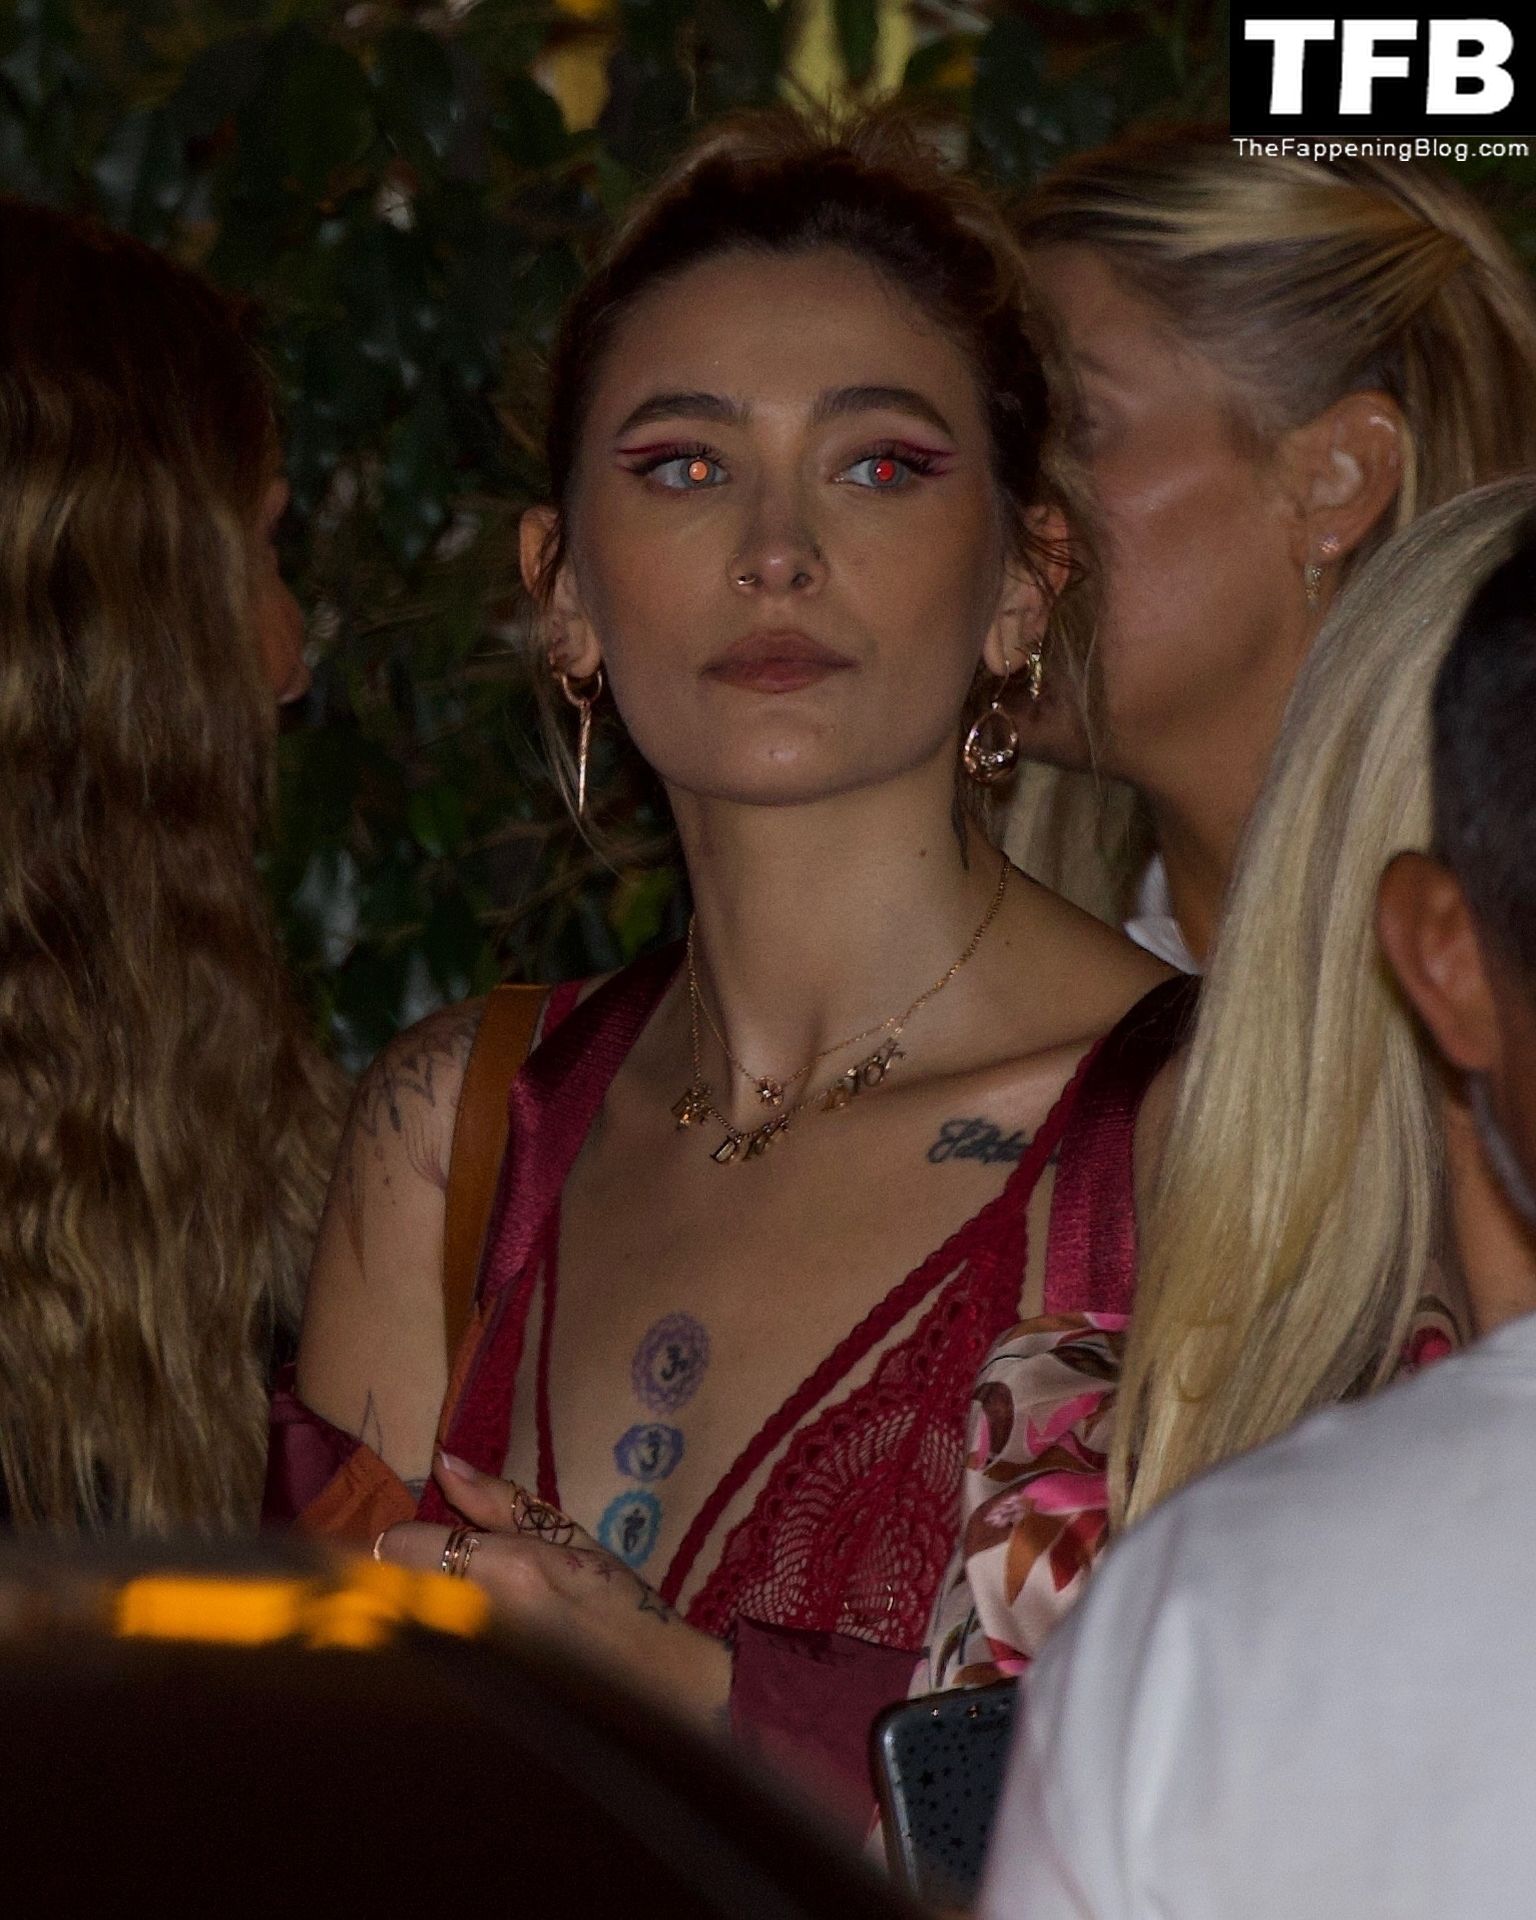 Paris Jackson See Through Nudity The Fappening Blog 17 - Paris Jackson Flashes Her Nude Tits Wearing a See-Through Bra in WeHo (34 Photos)